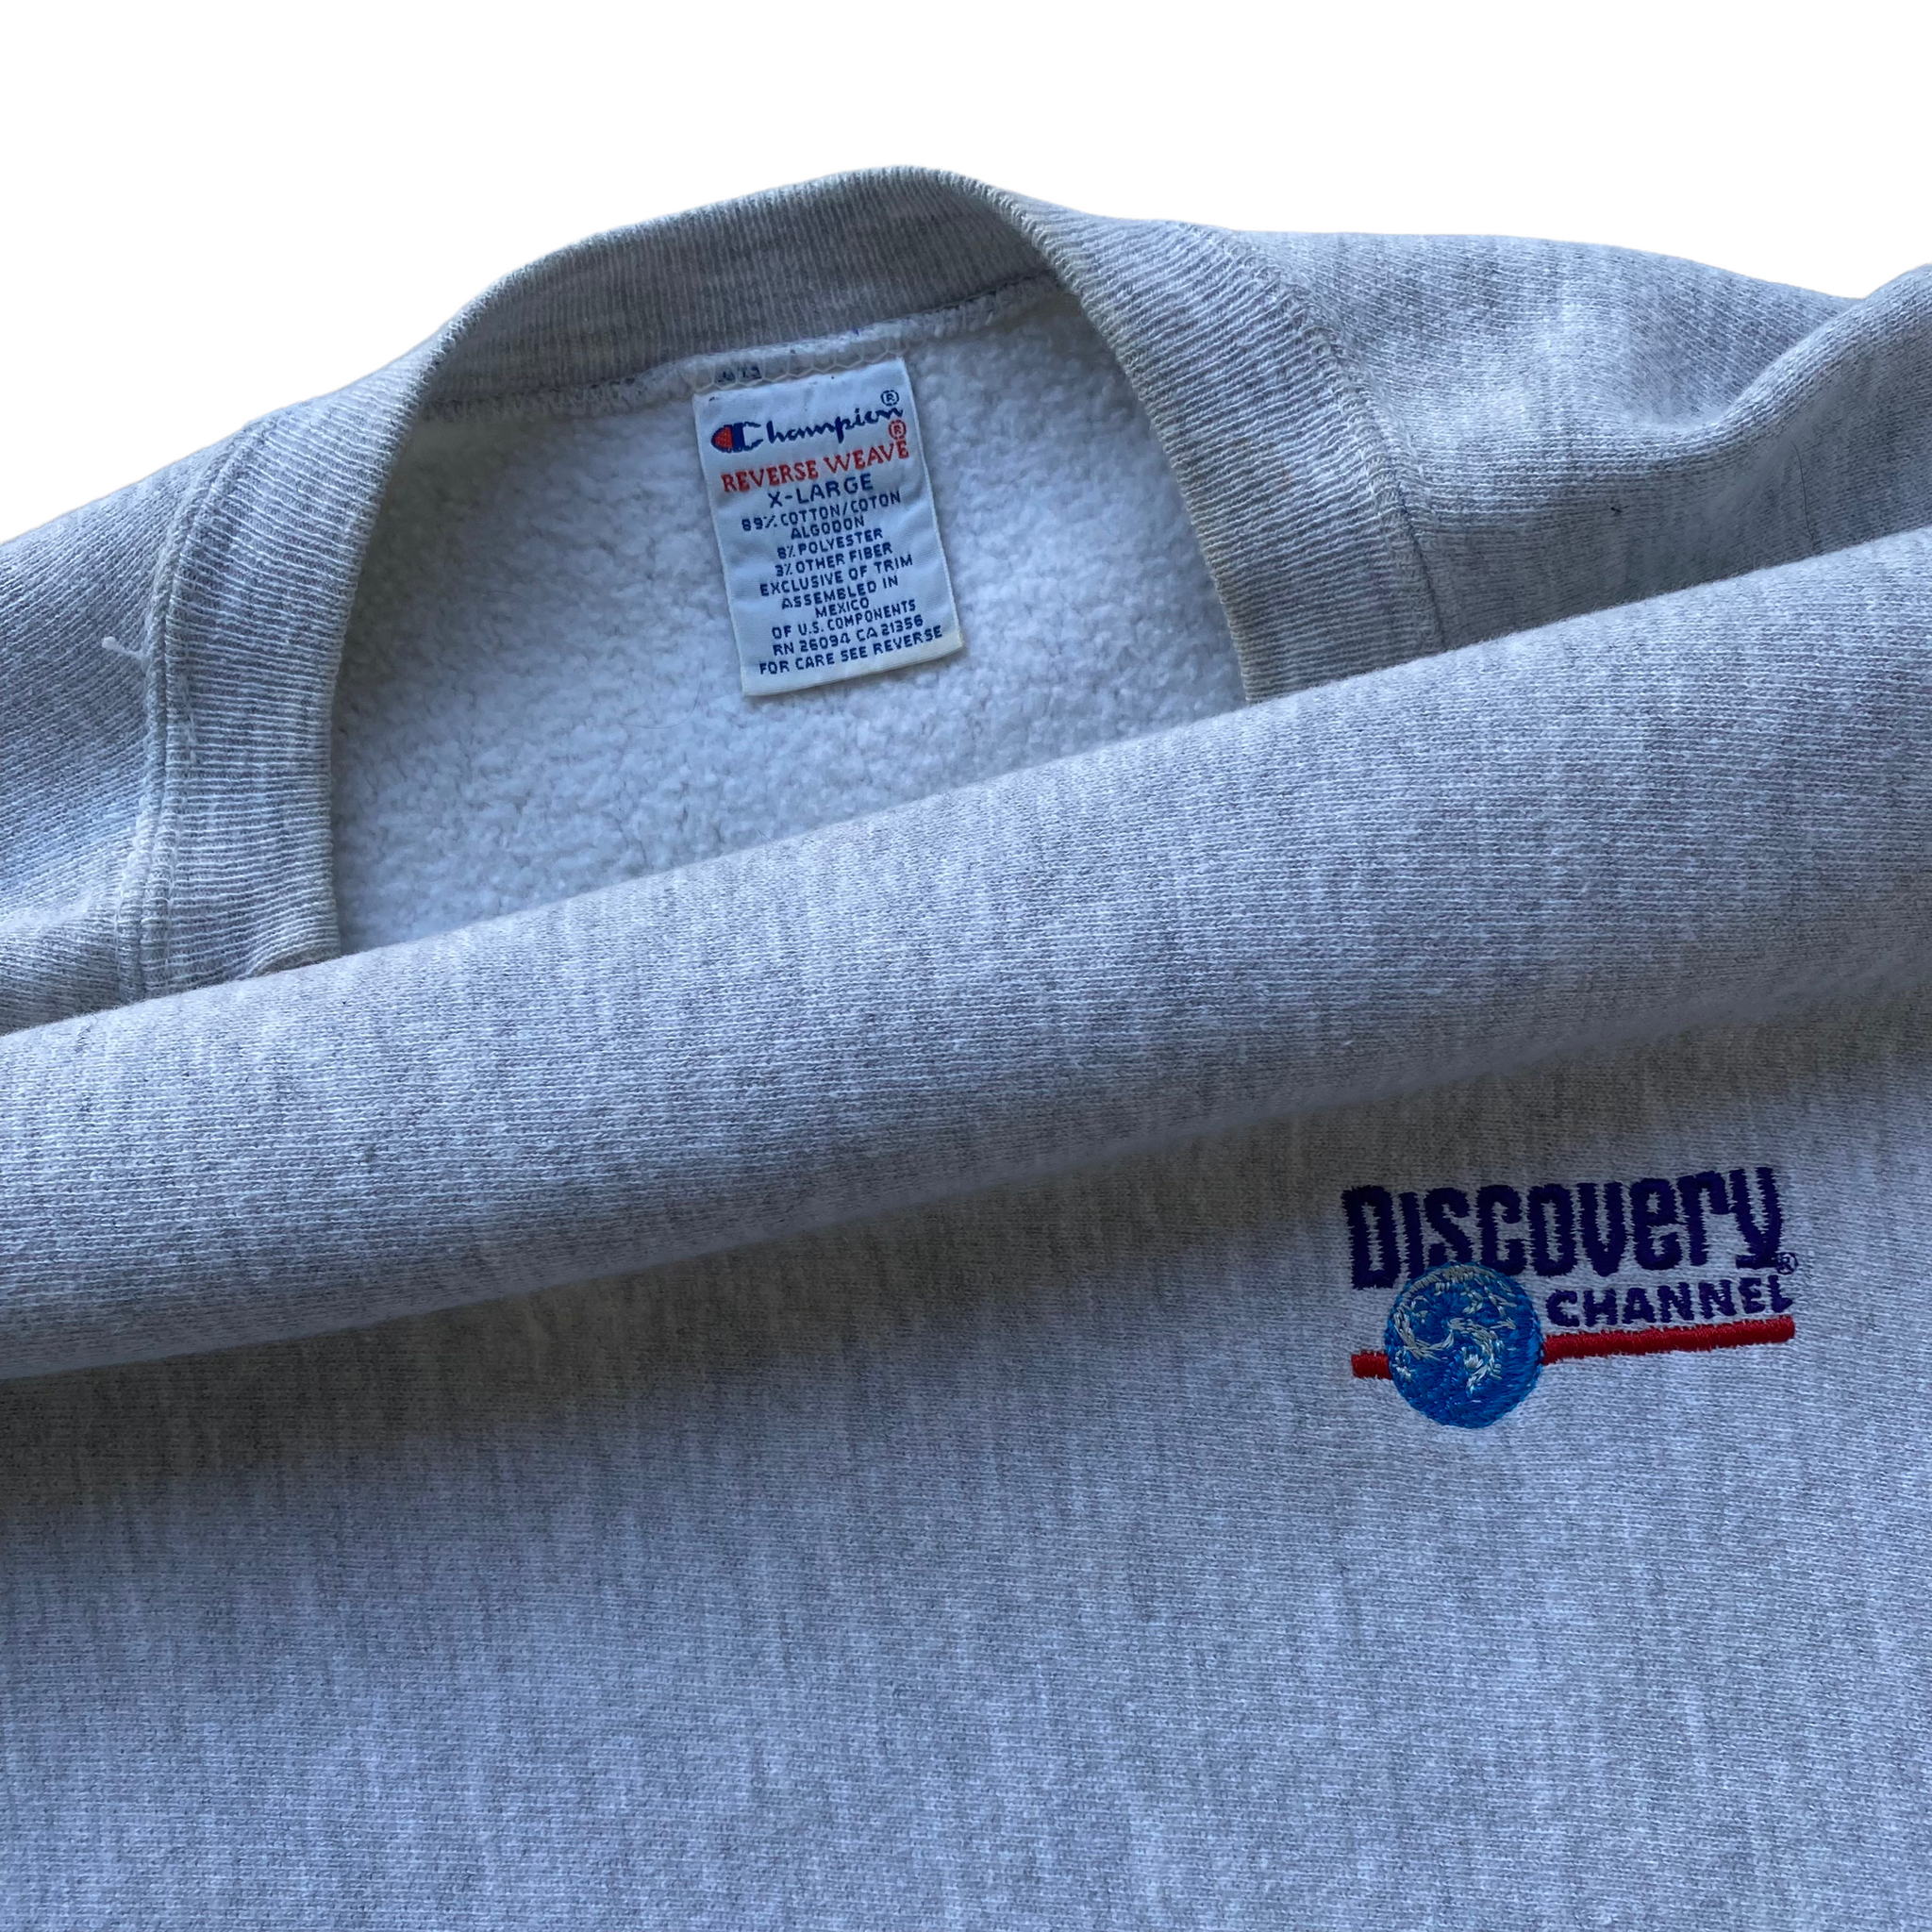 90s Champion reverse weave Discovery channel XL – Vintage Sponsor